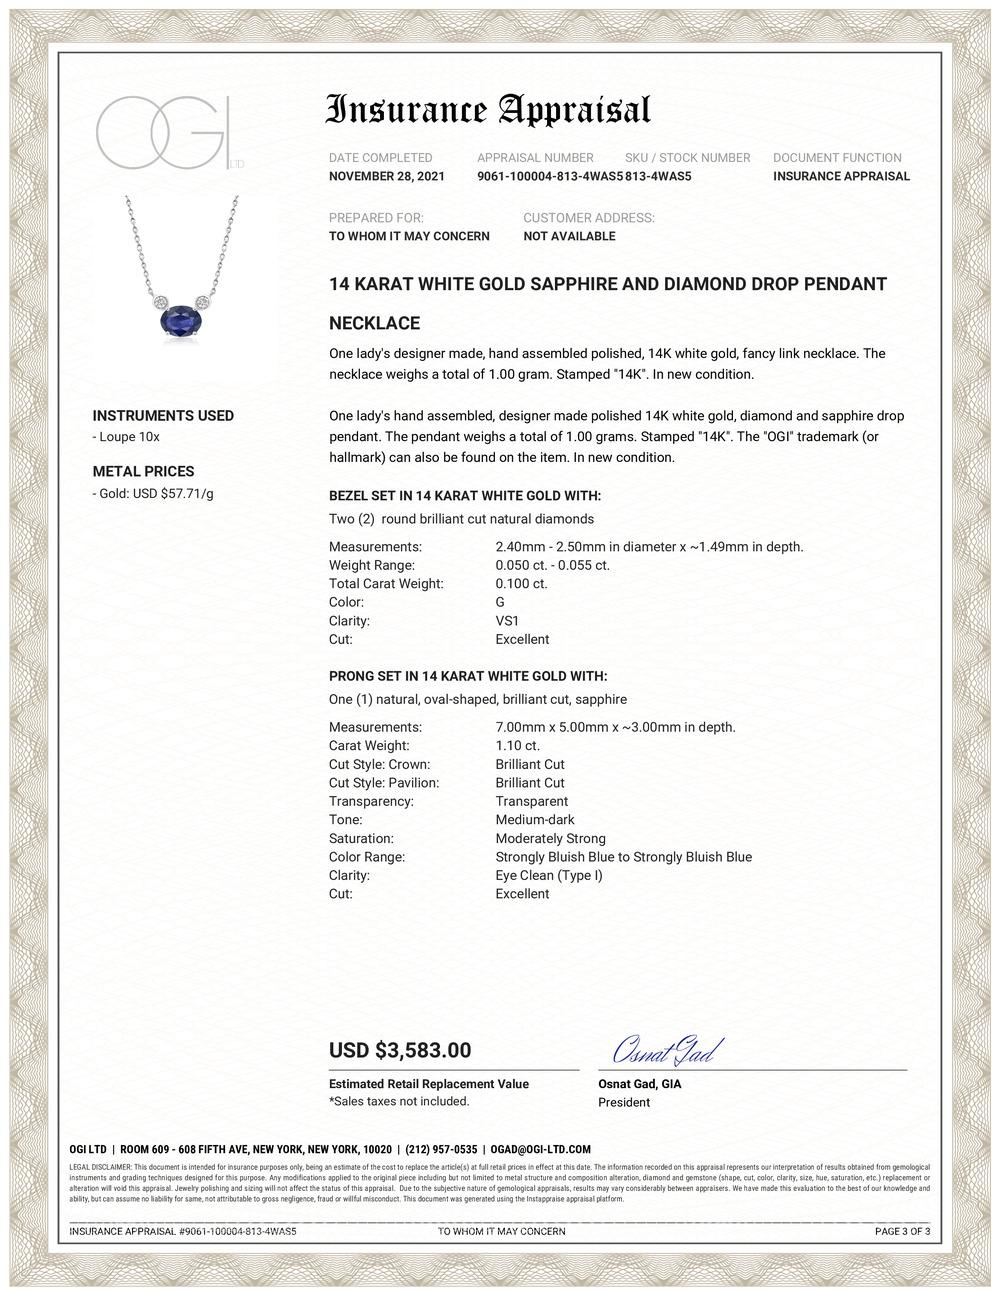 Fourteen karats white gold necklace pendant 
Necklace measuring 16 inches long
Oval shaped blue sapphire weighing 1.10 carats
Two bezel-set diamonds weighing 0.10 carats
Cable chain necklace with spring lock: a lock that fastens with spring bolt
New